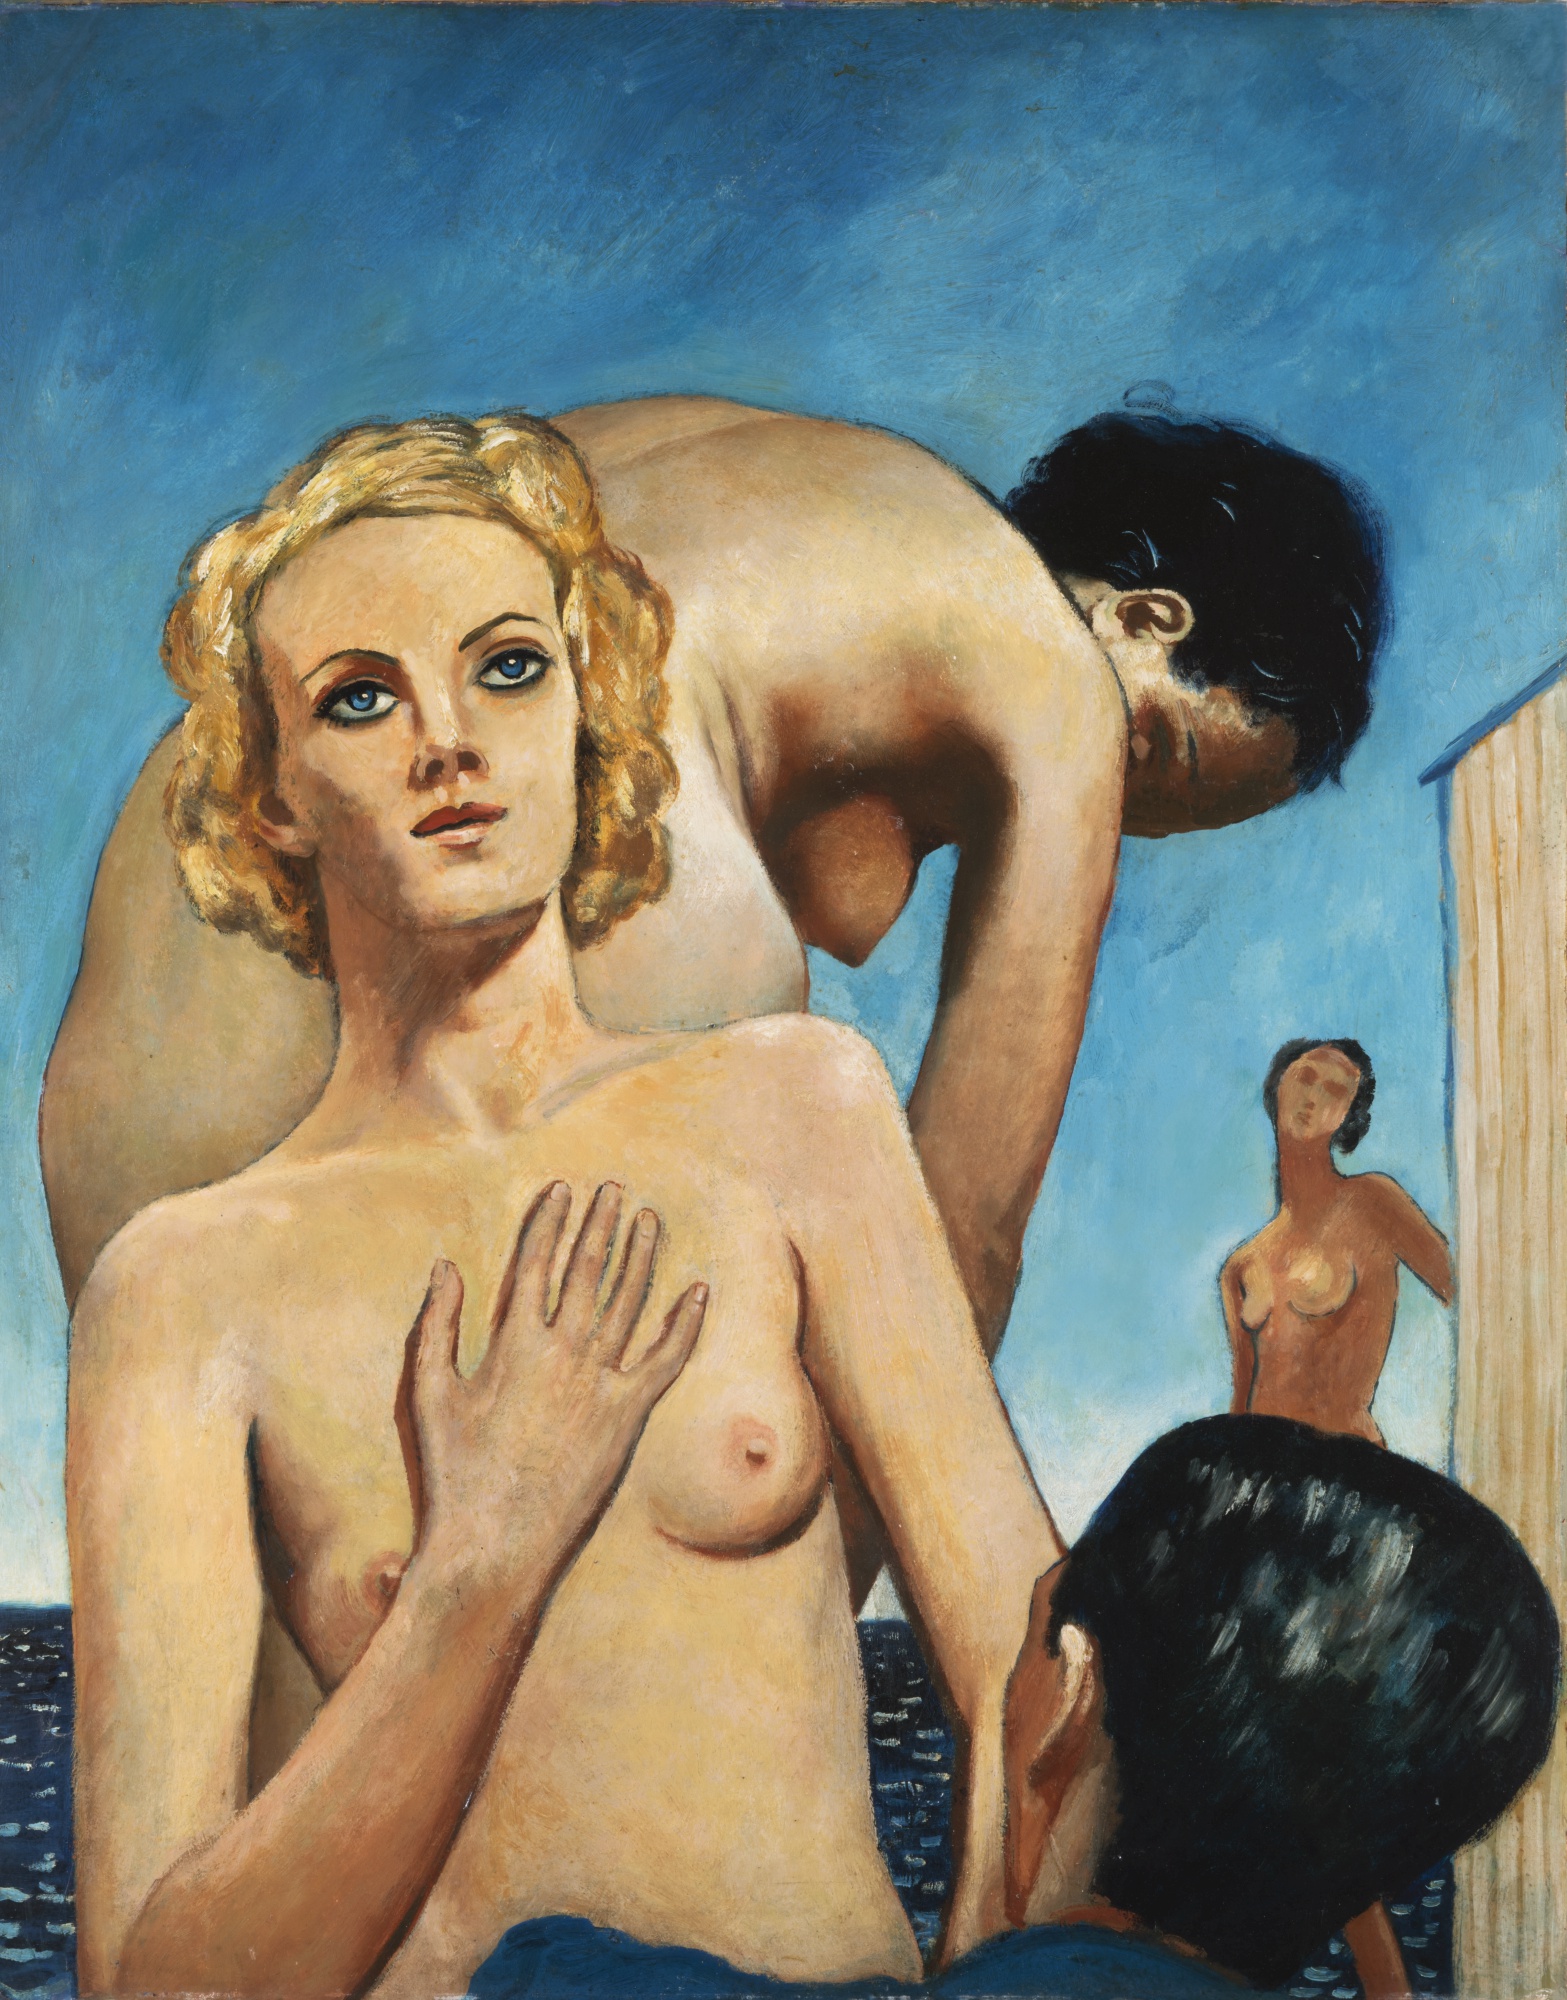 Les Baigneuses, Femmes Nues au Bord de la Mer (1941) by Francis Picabia, lot 15 in Sotheby’s forthcoming sale